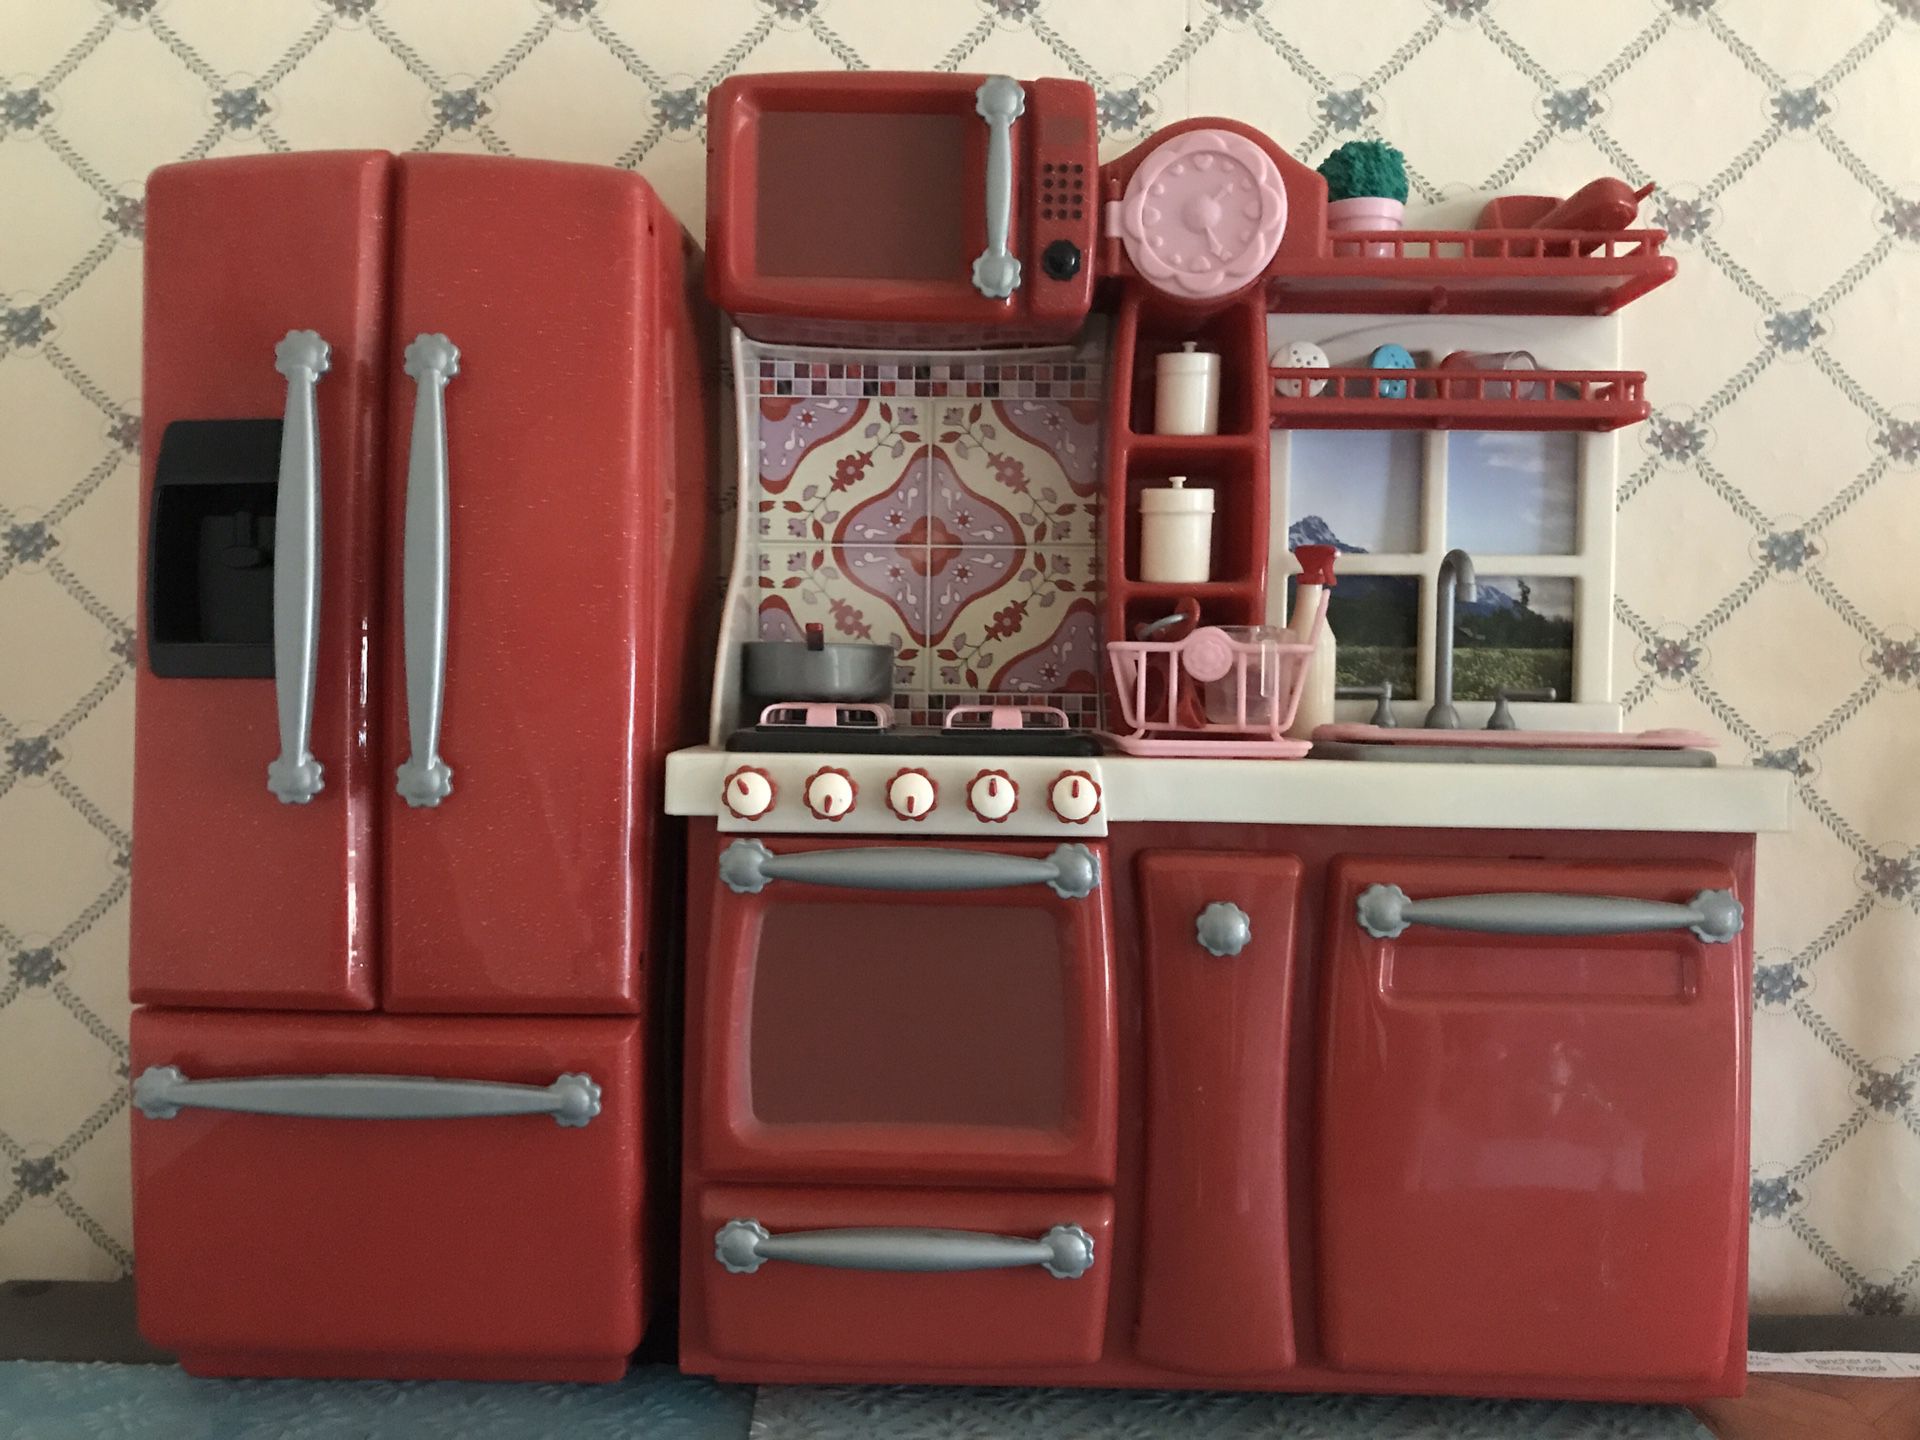 Our Generation Red Kitchen Retired with Accessories and extra food